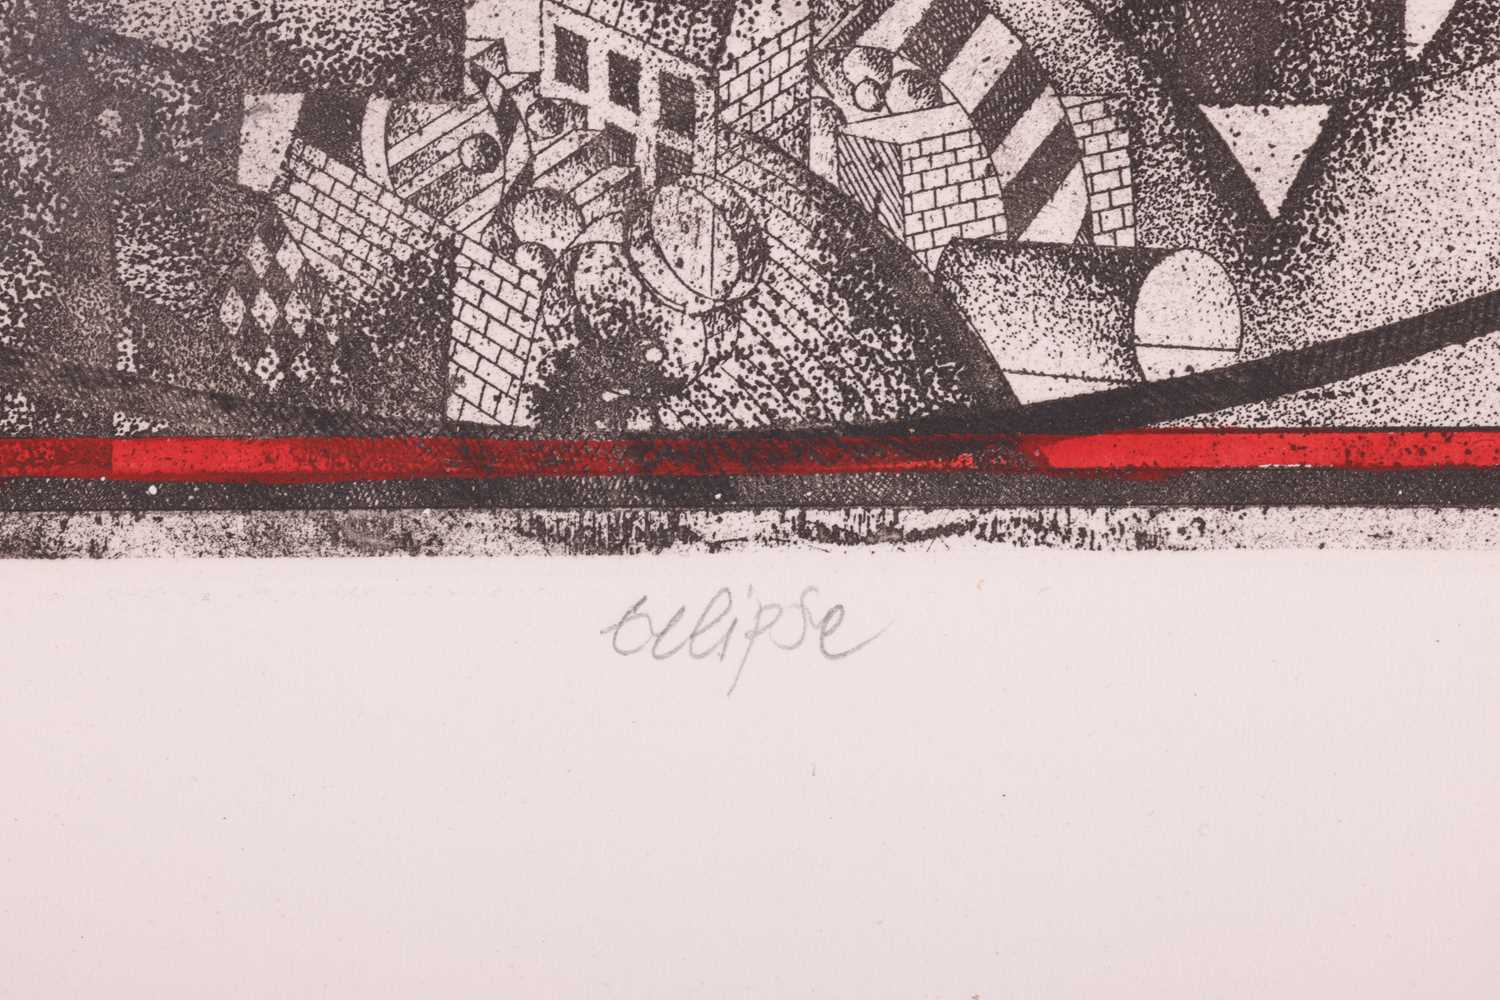 Assadour Bezdikian (Lebanese/French, b.1943), 'Eclipse', signed and dated in pencil 'Assadour 72' an - Image 4 of 11